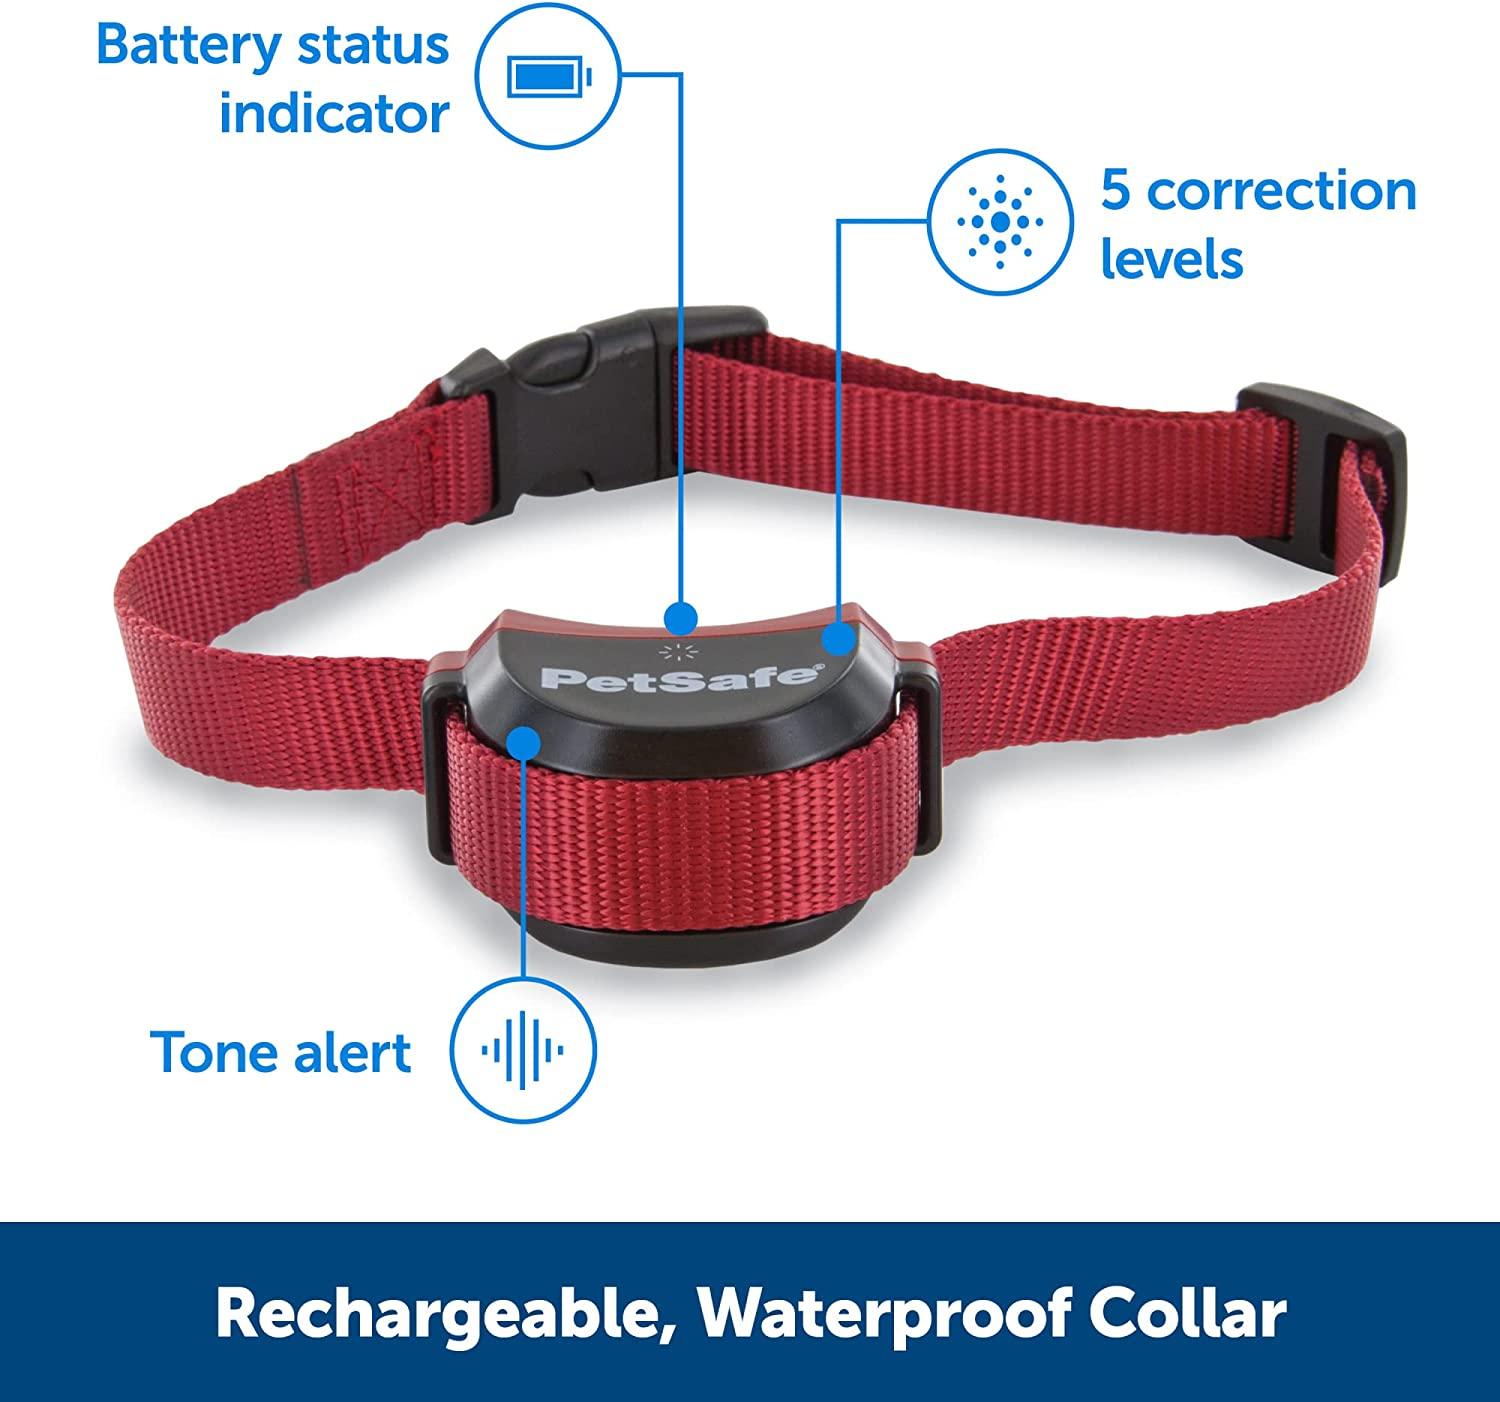 Invisible Fence® Brand Replacement Collar - Fence-A-Pet